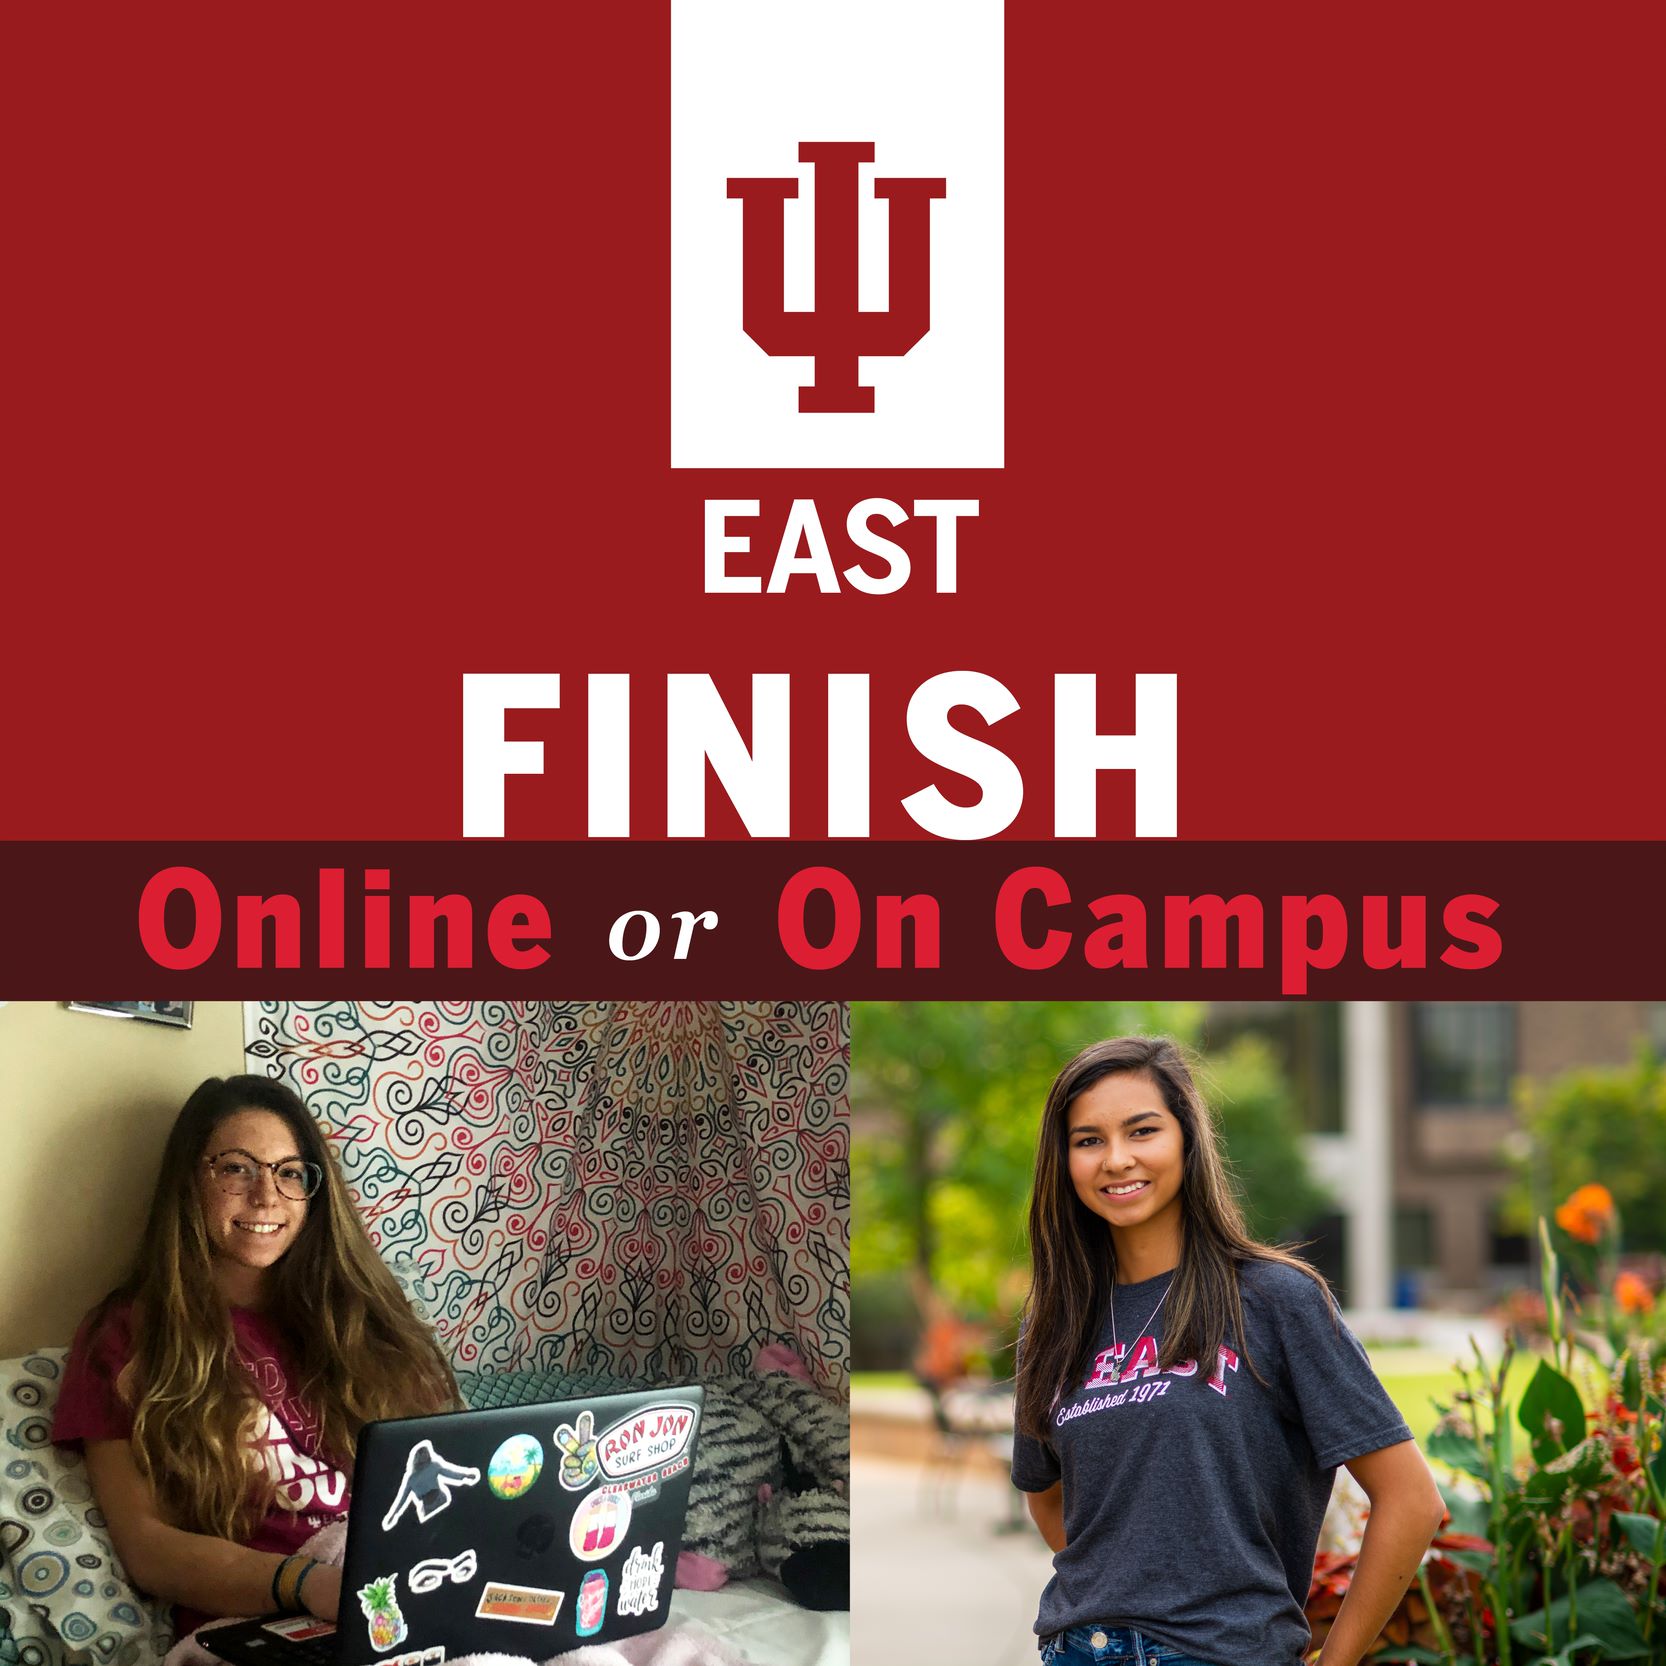 iu-east-finish-online-or-on-campus.jpeg